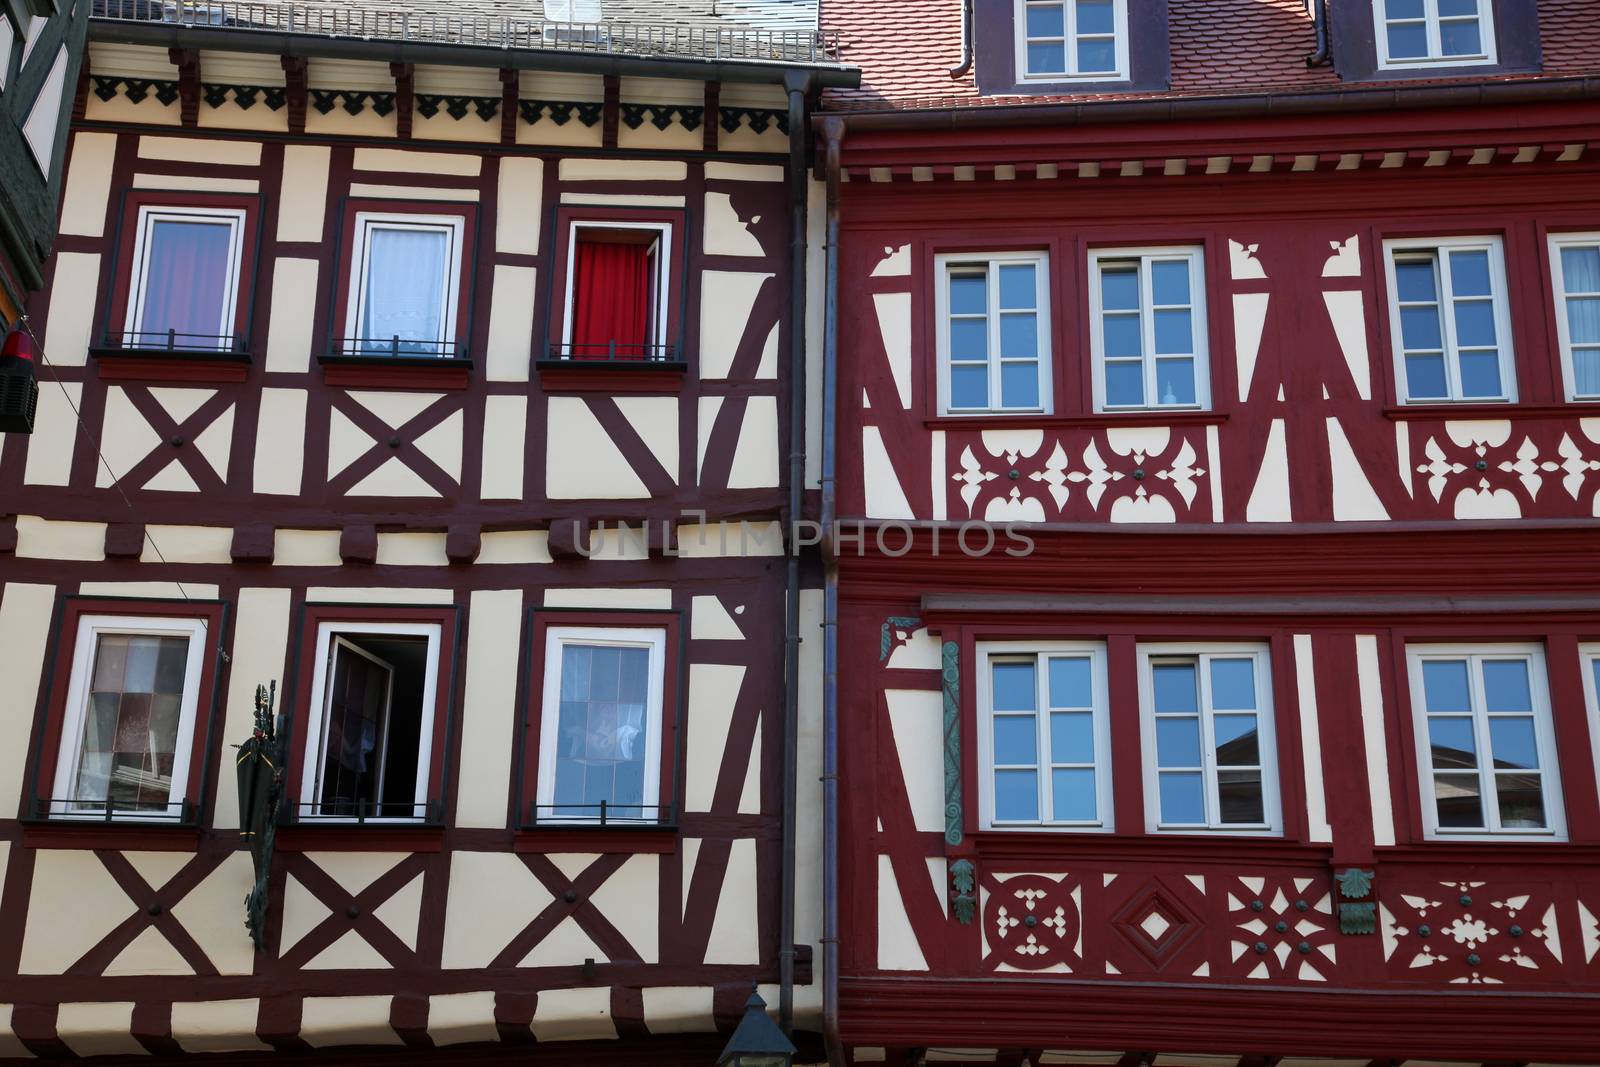 Half-timbered old houses in Miltenberg, Germany